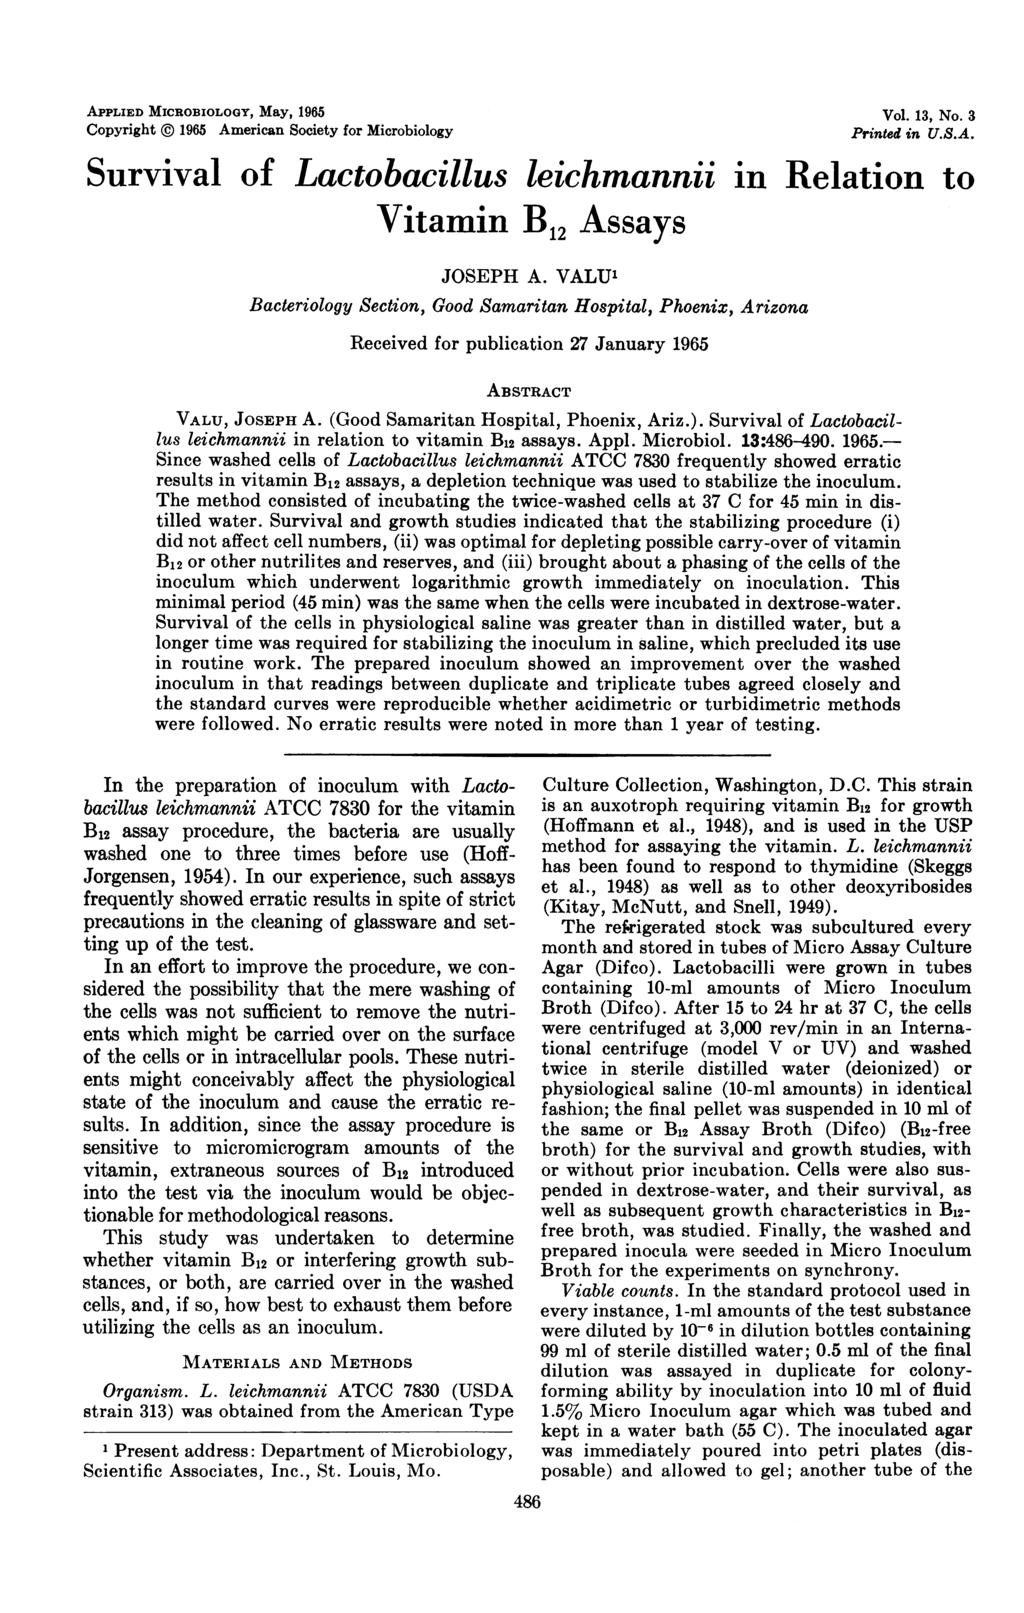 APPLIED MICROBIOLOGY, May, 1965 Copyright @ 1965 American Society for Microbiology Vol. 13, No. 3 Printed in U.S.A. Survival of Lactobacillus leichmannii in Relation to Vitamin B12 Assays JOSEPH A.